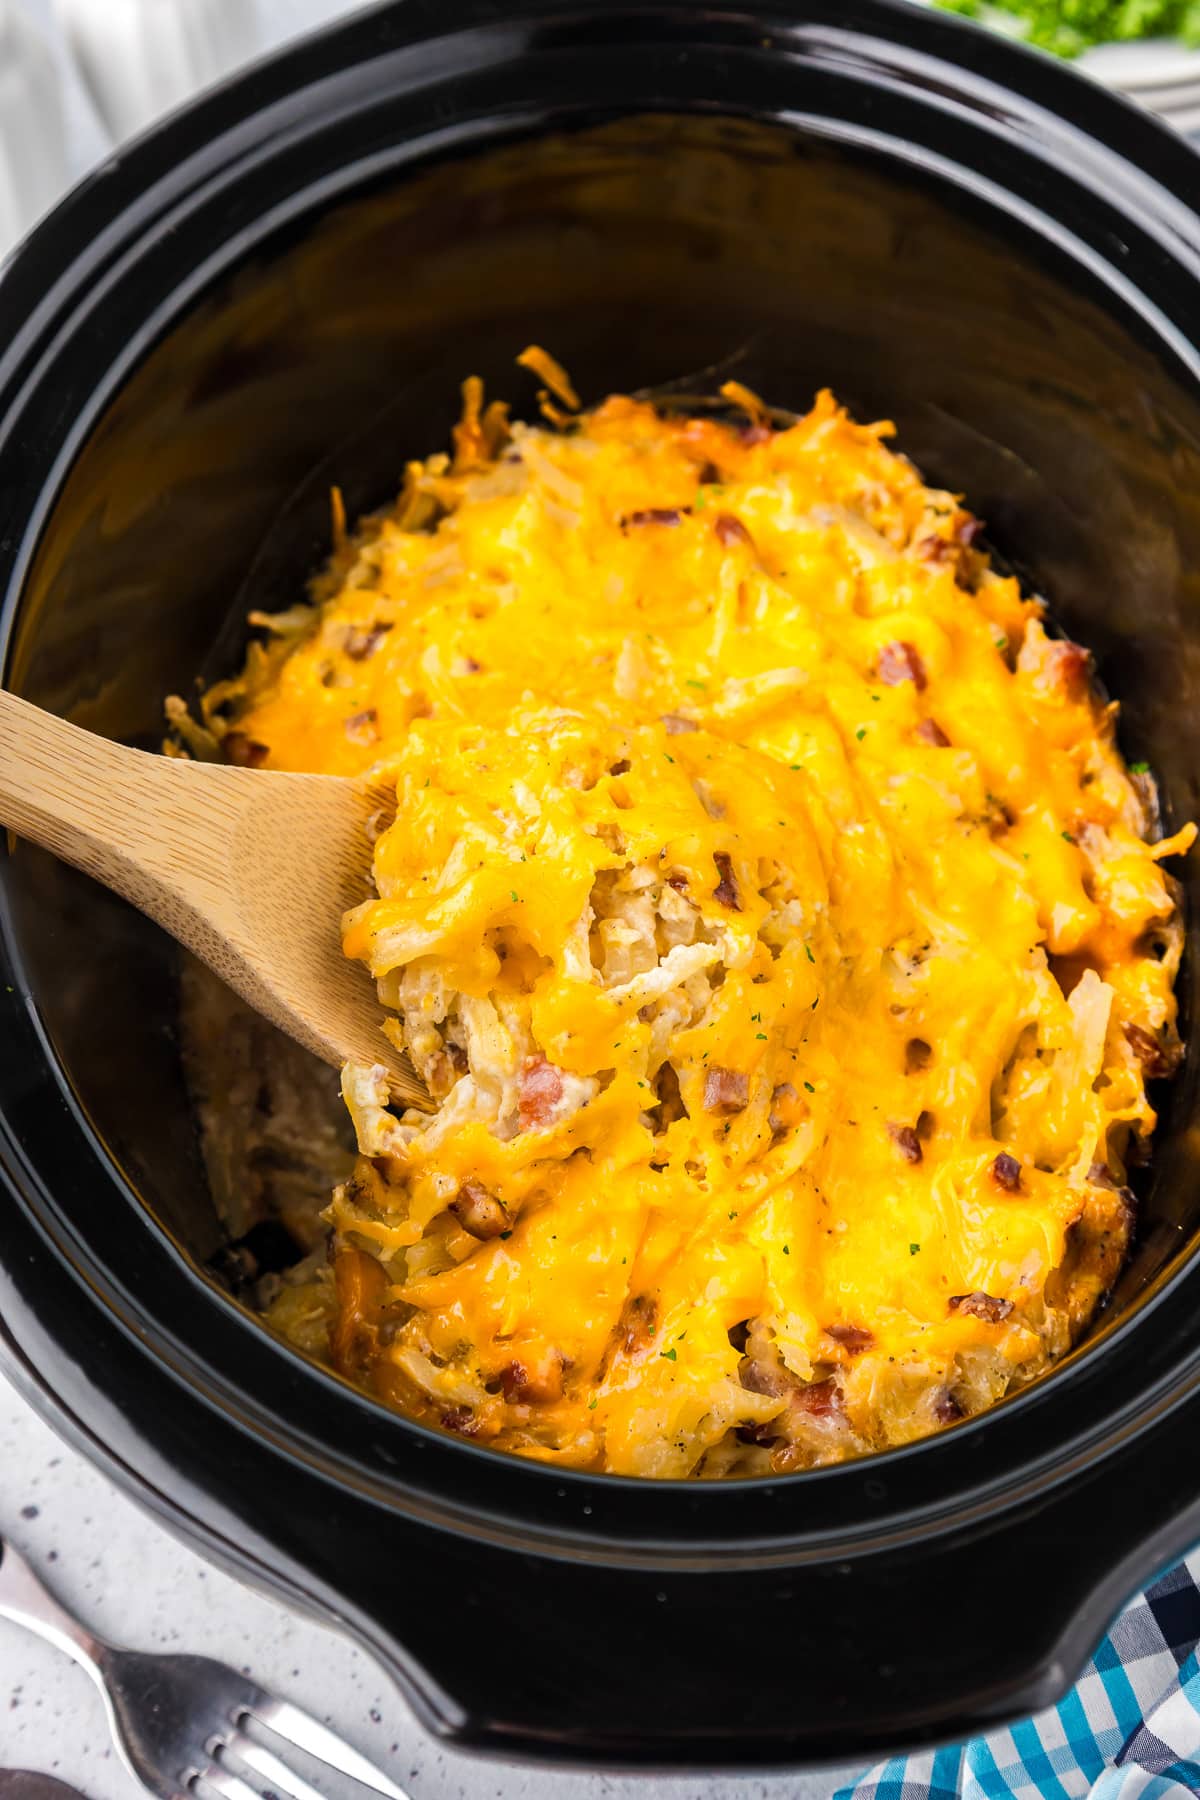 A slow cooker filled with a cheesy hashbrown casserole topped with melted cheddar cheese being scooped and a wooden spoon.